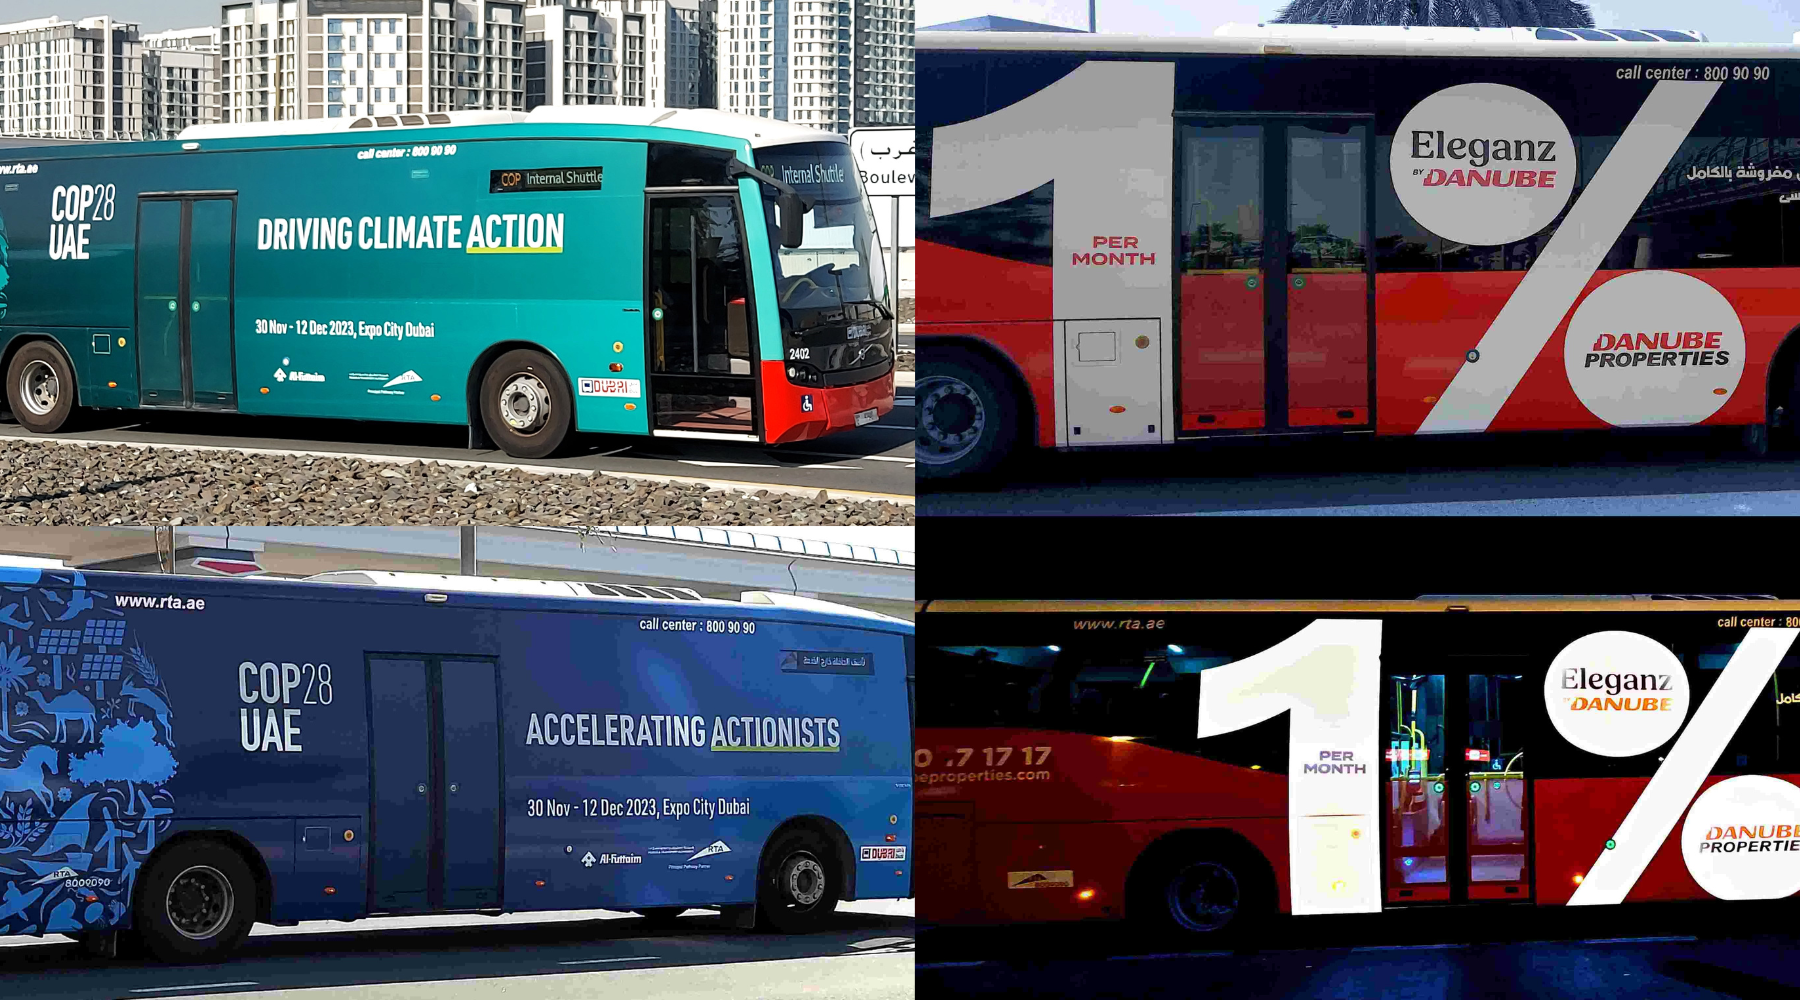 From COP28 to Danube Properties: SkyBlue Media's Latest Bus Advertising Developments